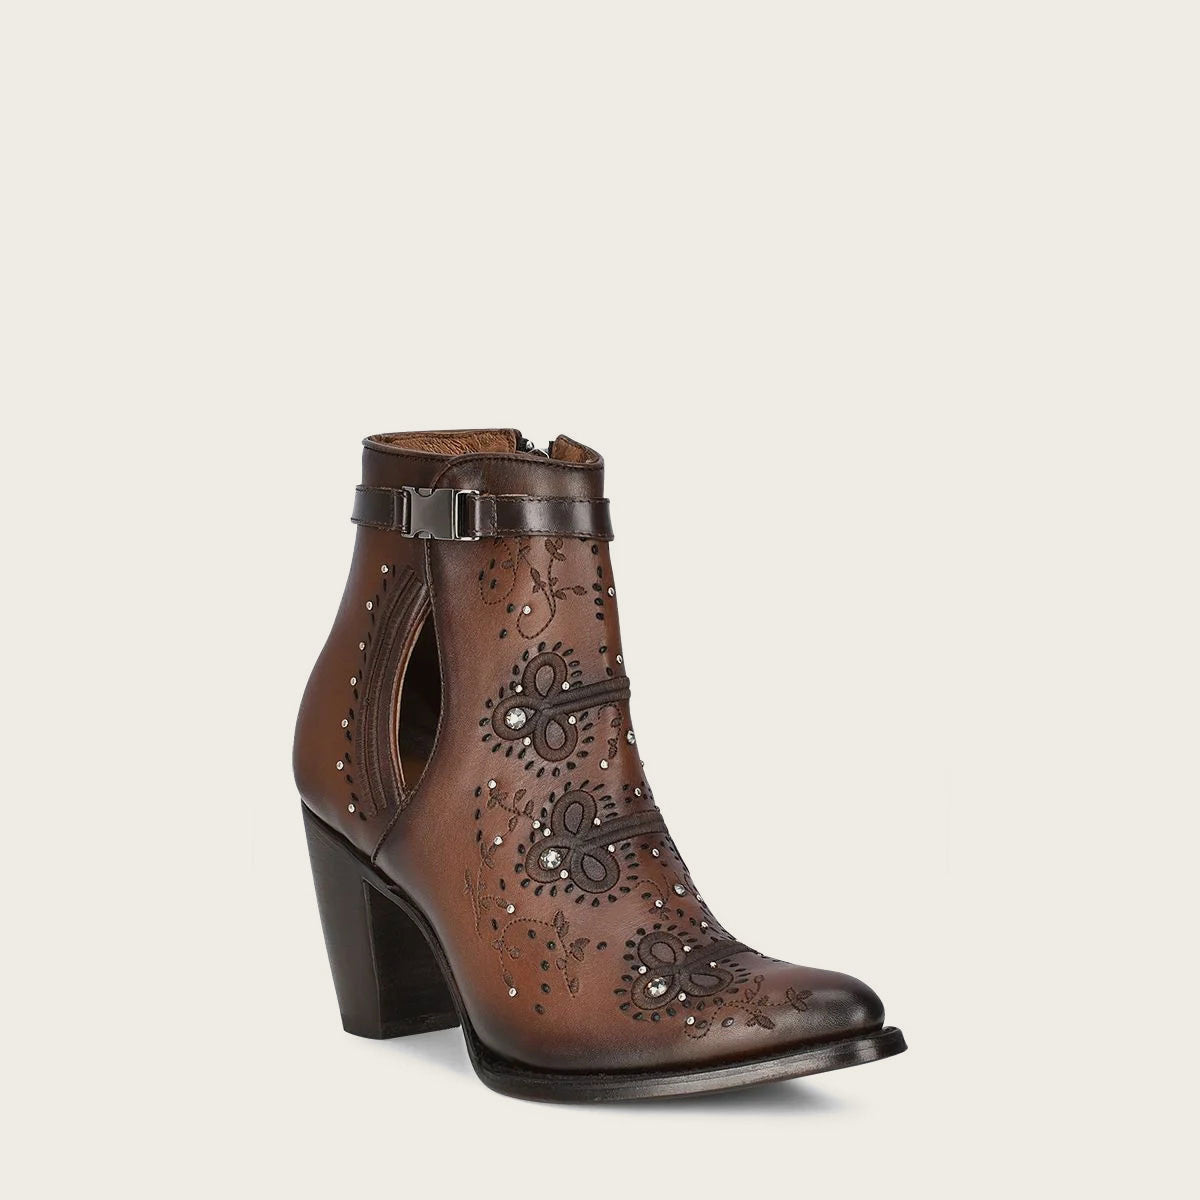 Brown perforated and embroidery bootie with crystals